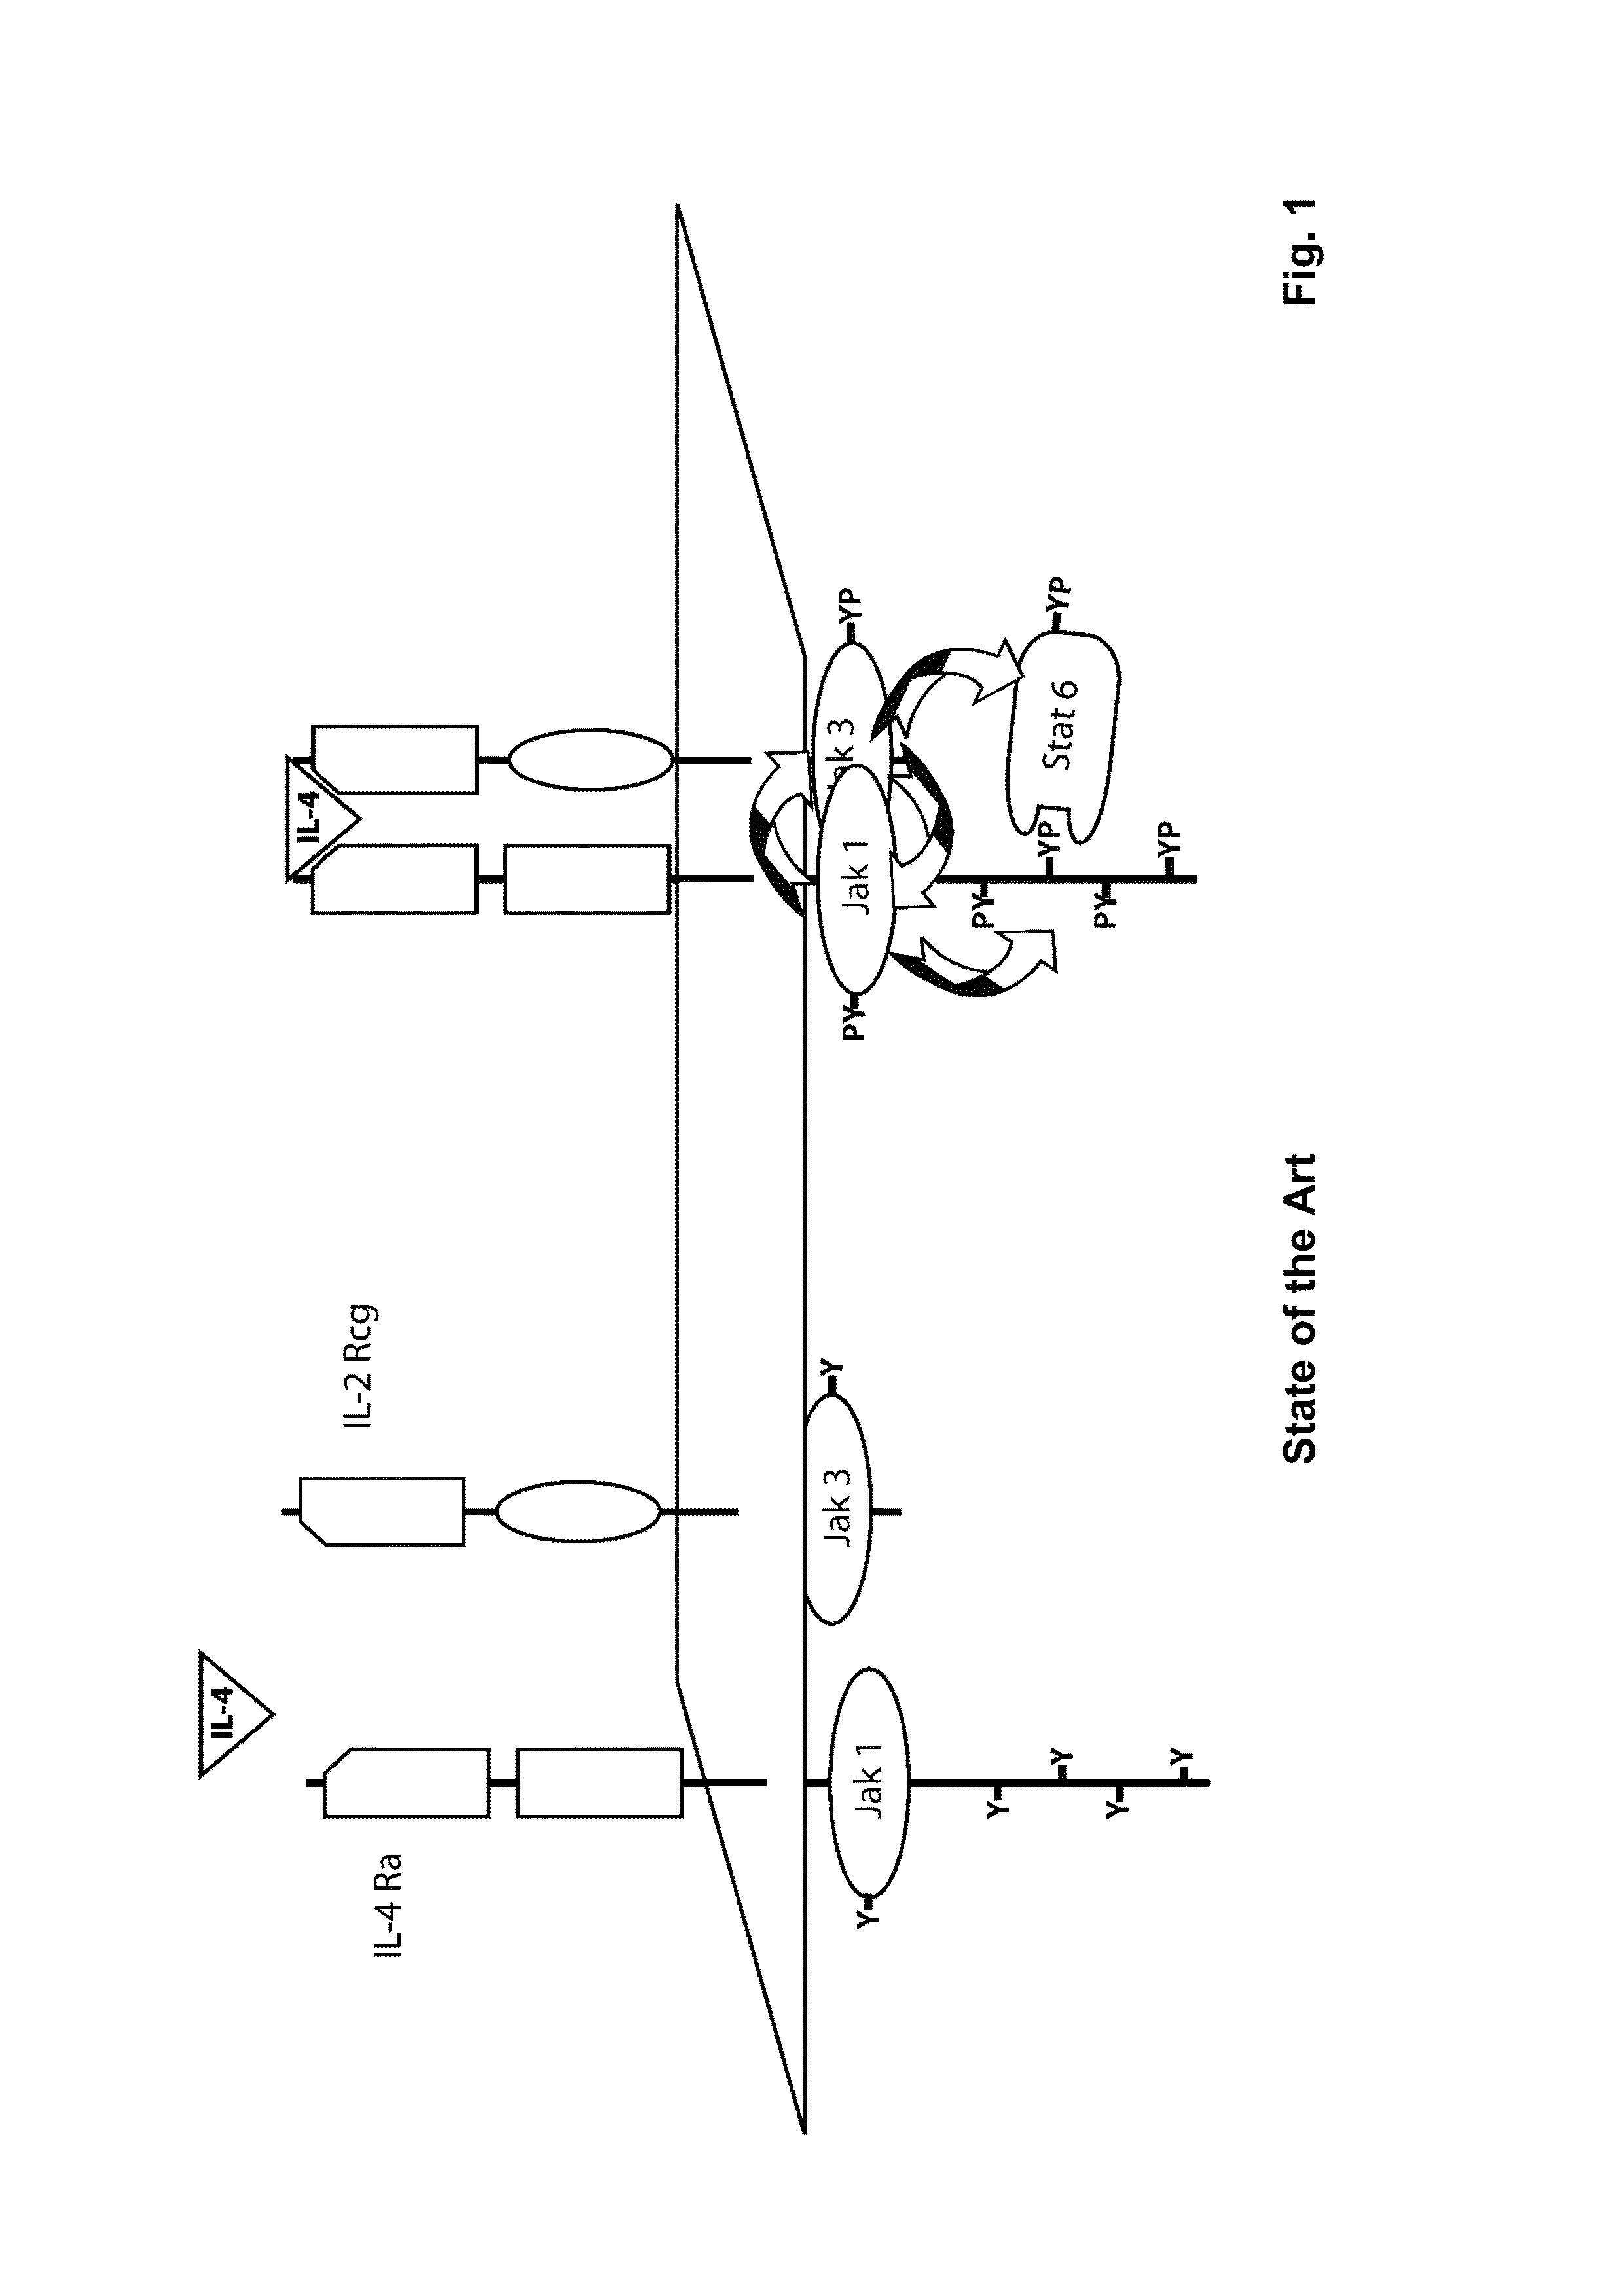 Methods and compositions for reducing interleukin-4 or interleukin-13 signaling